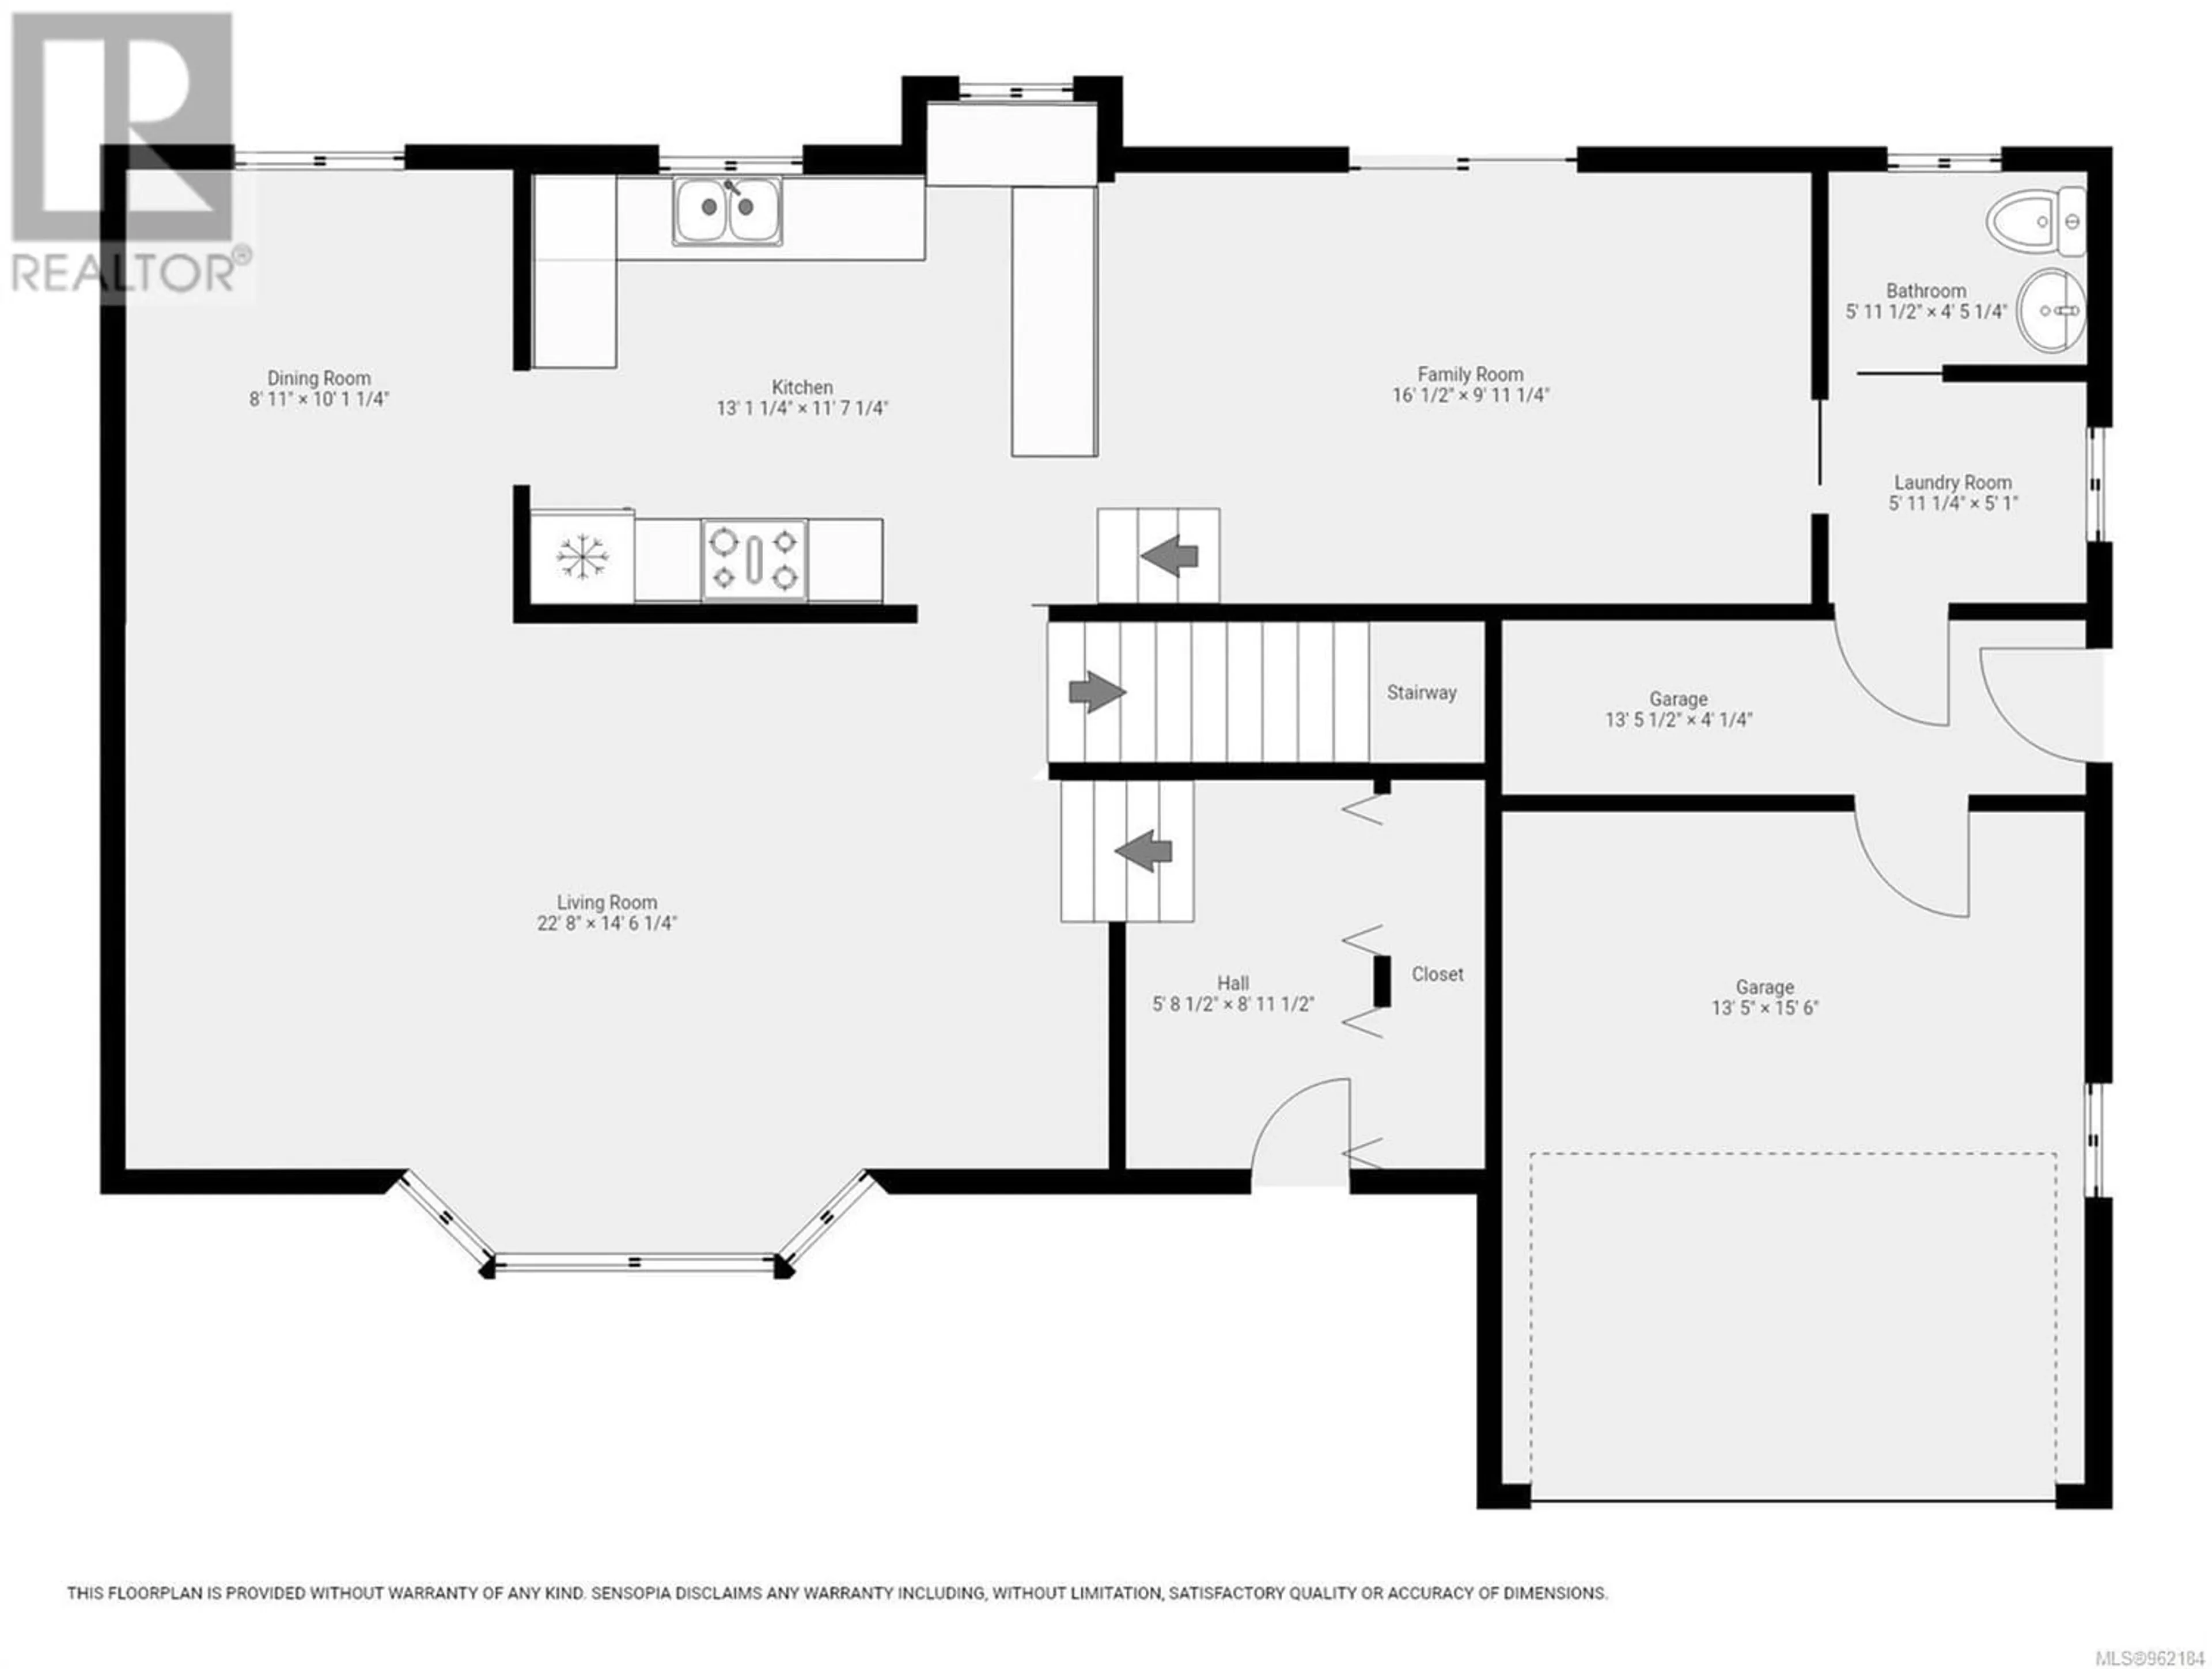 Floor plan for 184 Reef Cres, Campbell River British Columbia V9W7L7